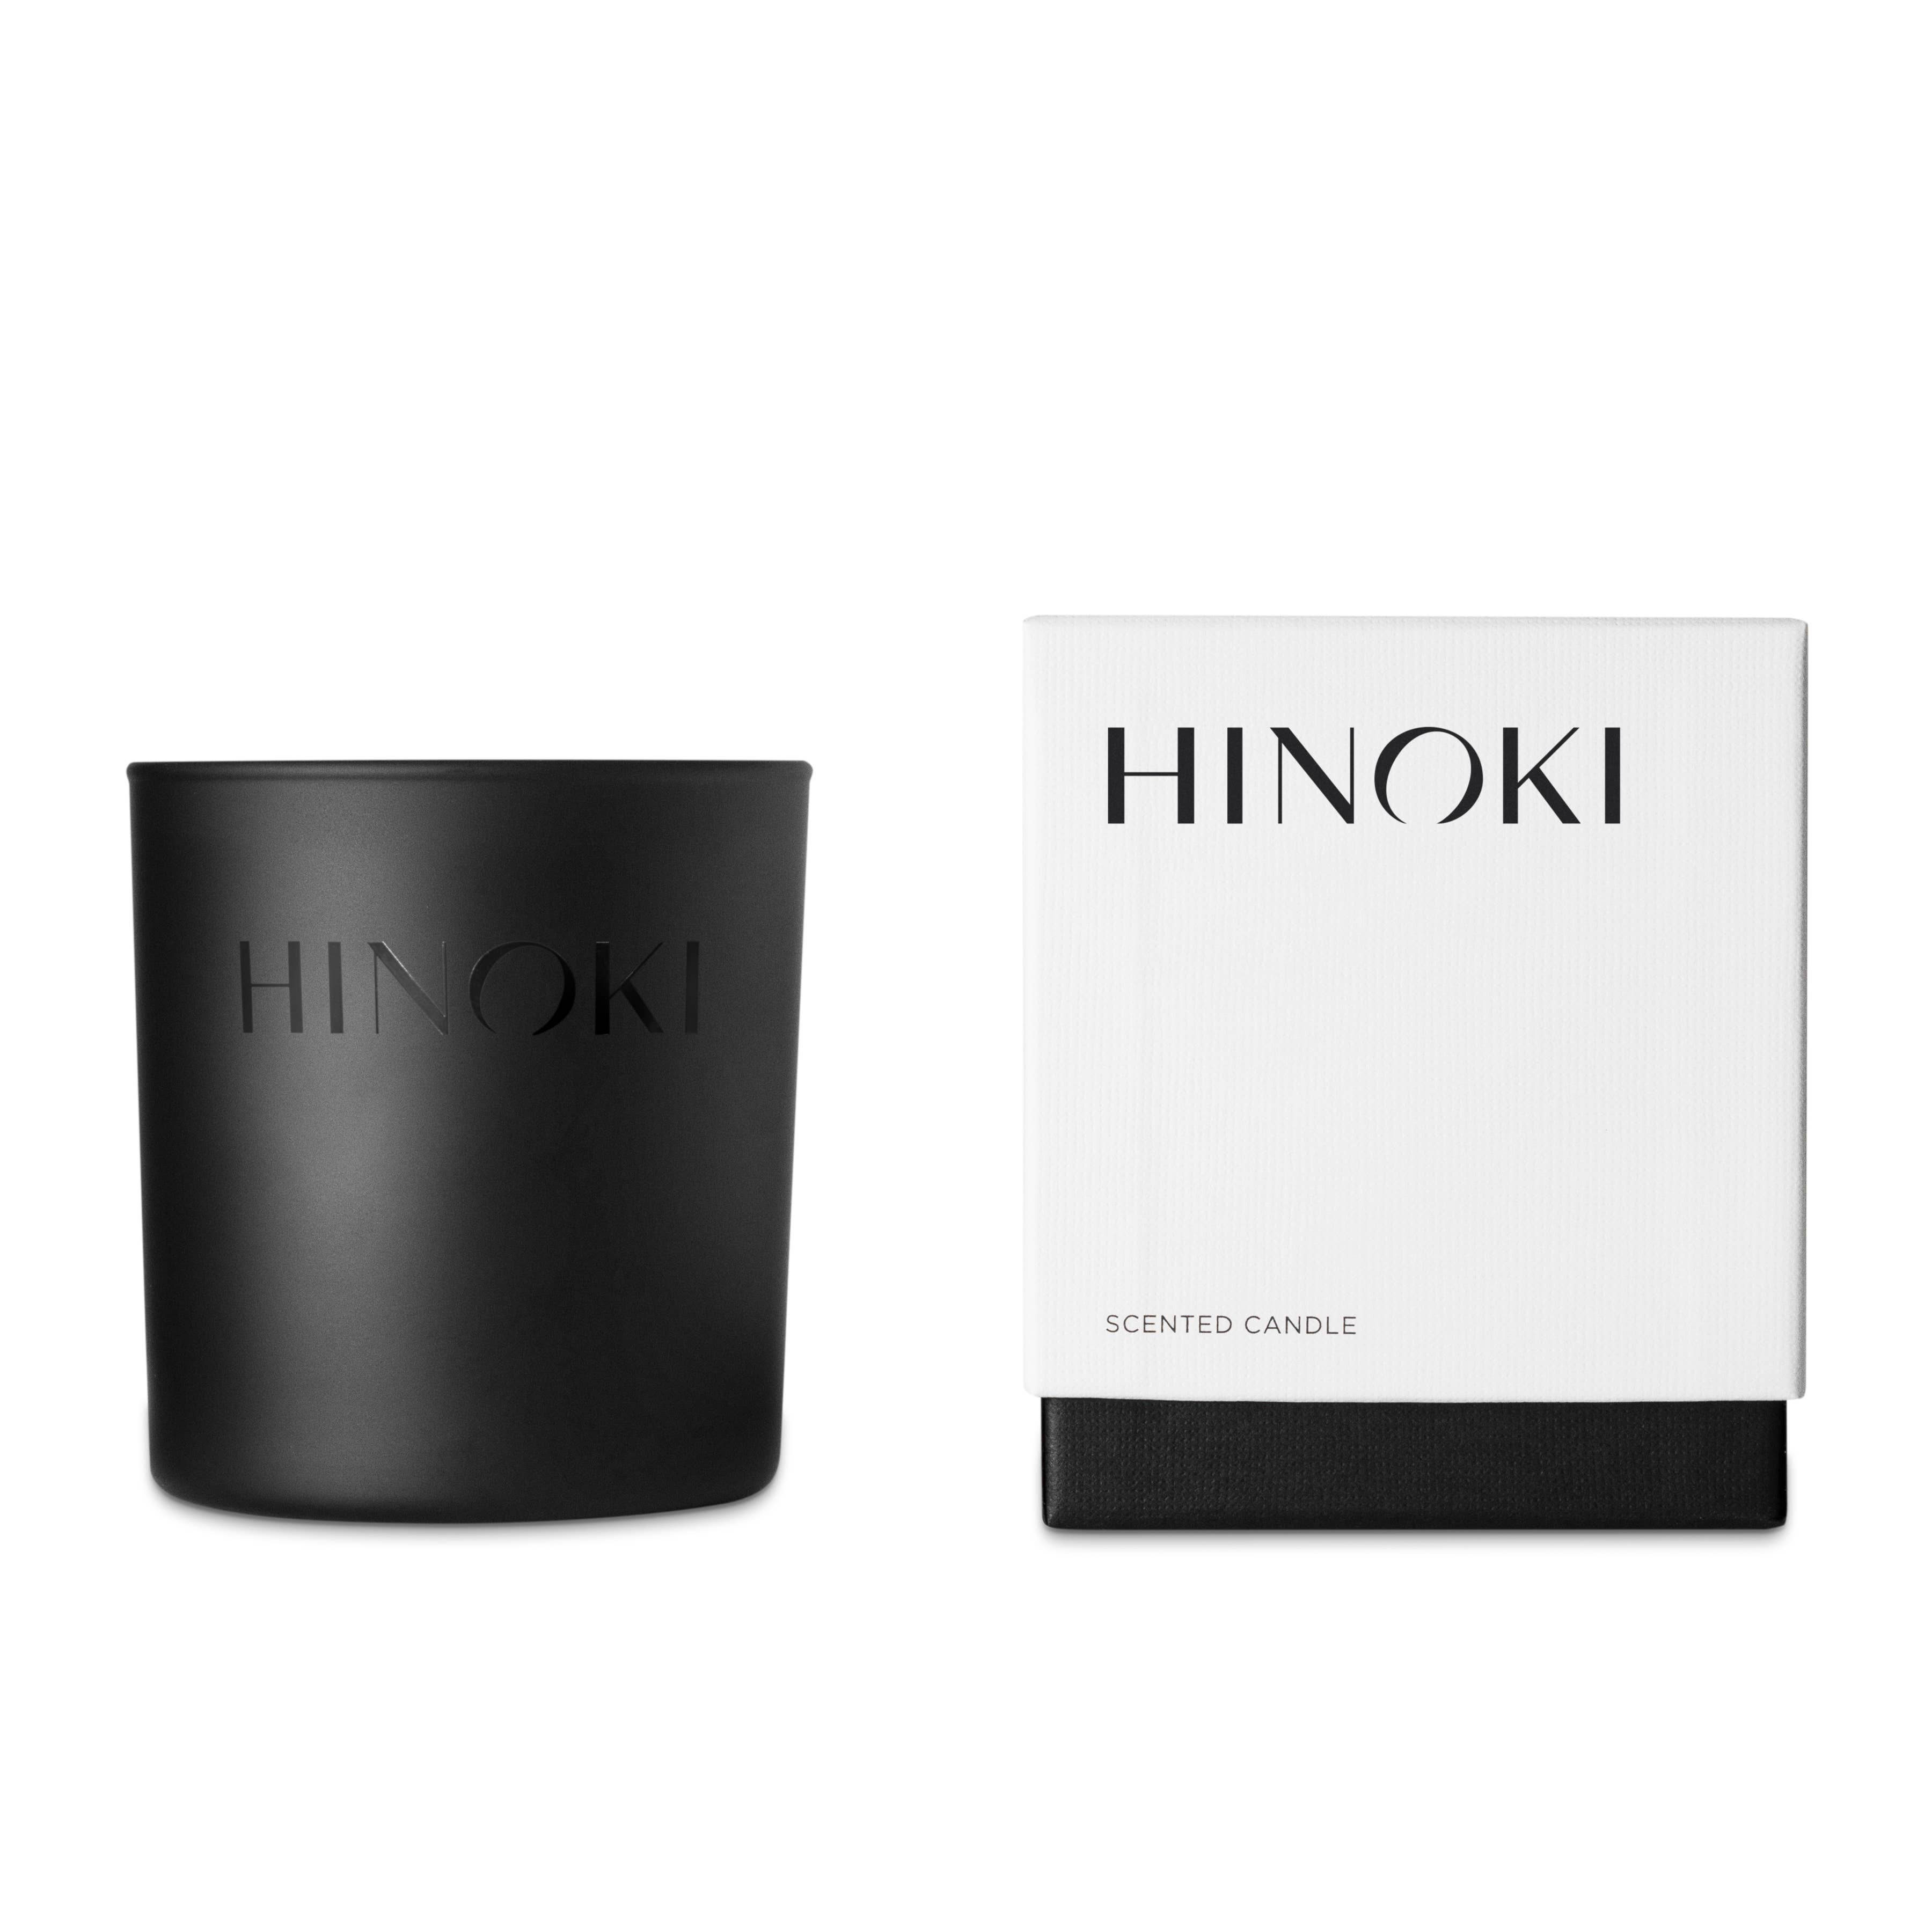 black glass candle and white box for candle that says hinoki